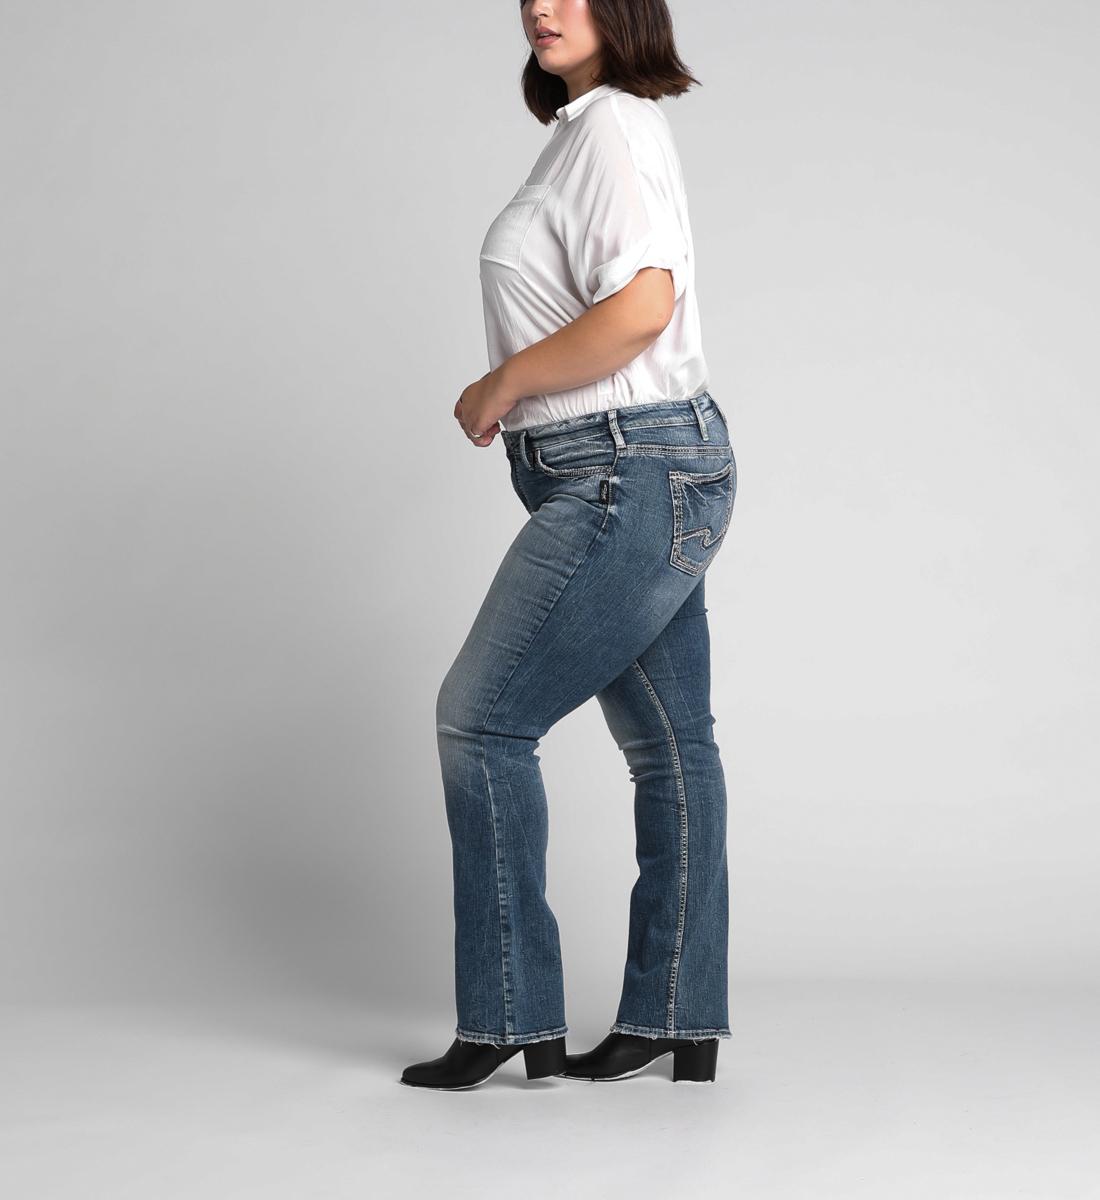 levi's 501 authentically yours